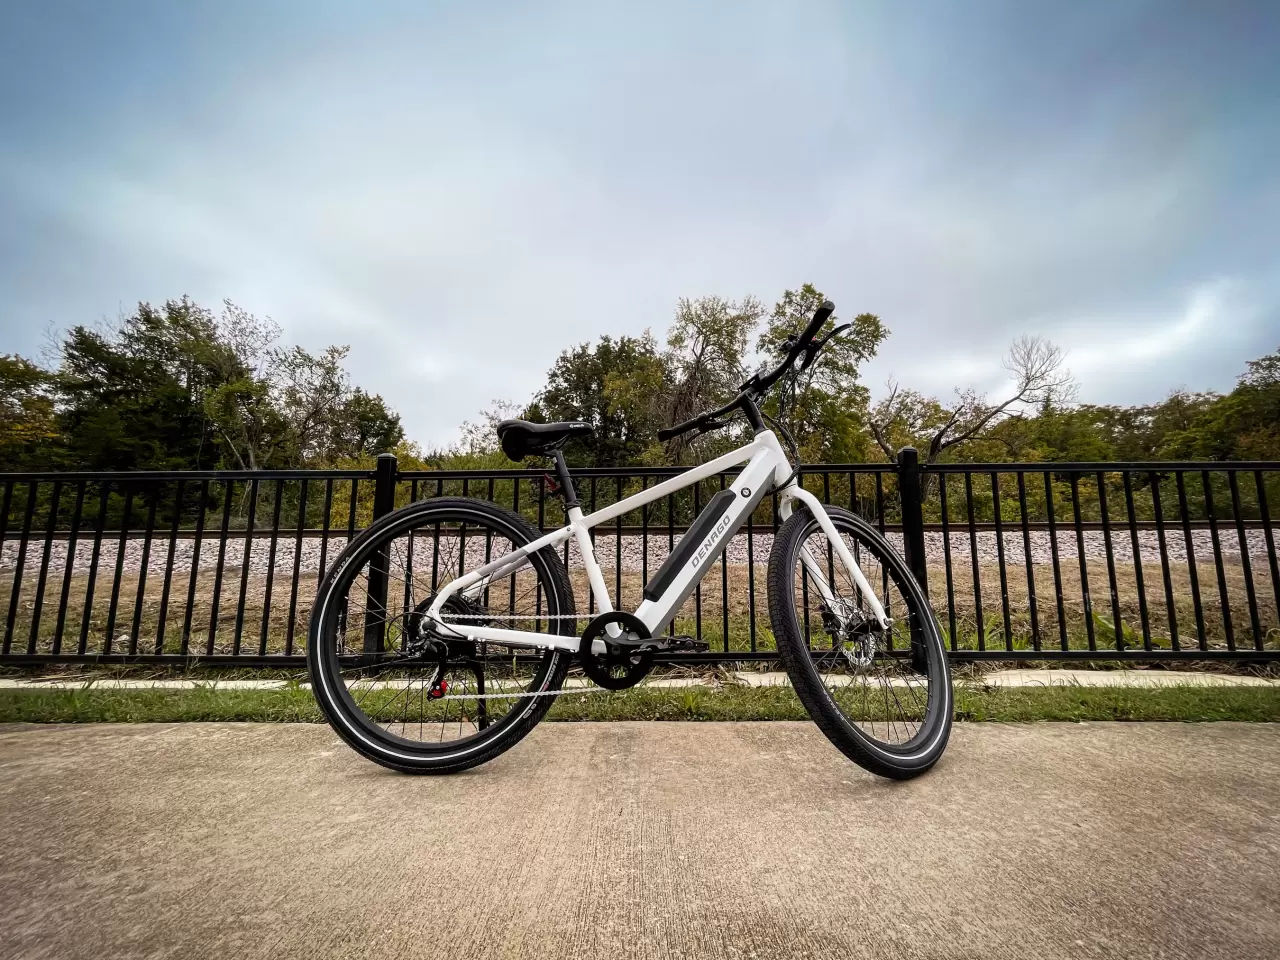 Denago is celebrating Black Friday with a special offer on their award-winning City Model 1 Top-Tube eBike. Regularly $1,499, it’s temporarily available for $1,199 (20% off) from now until December 2. img#1